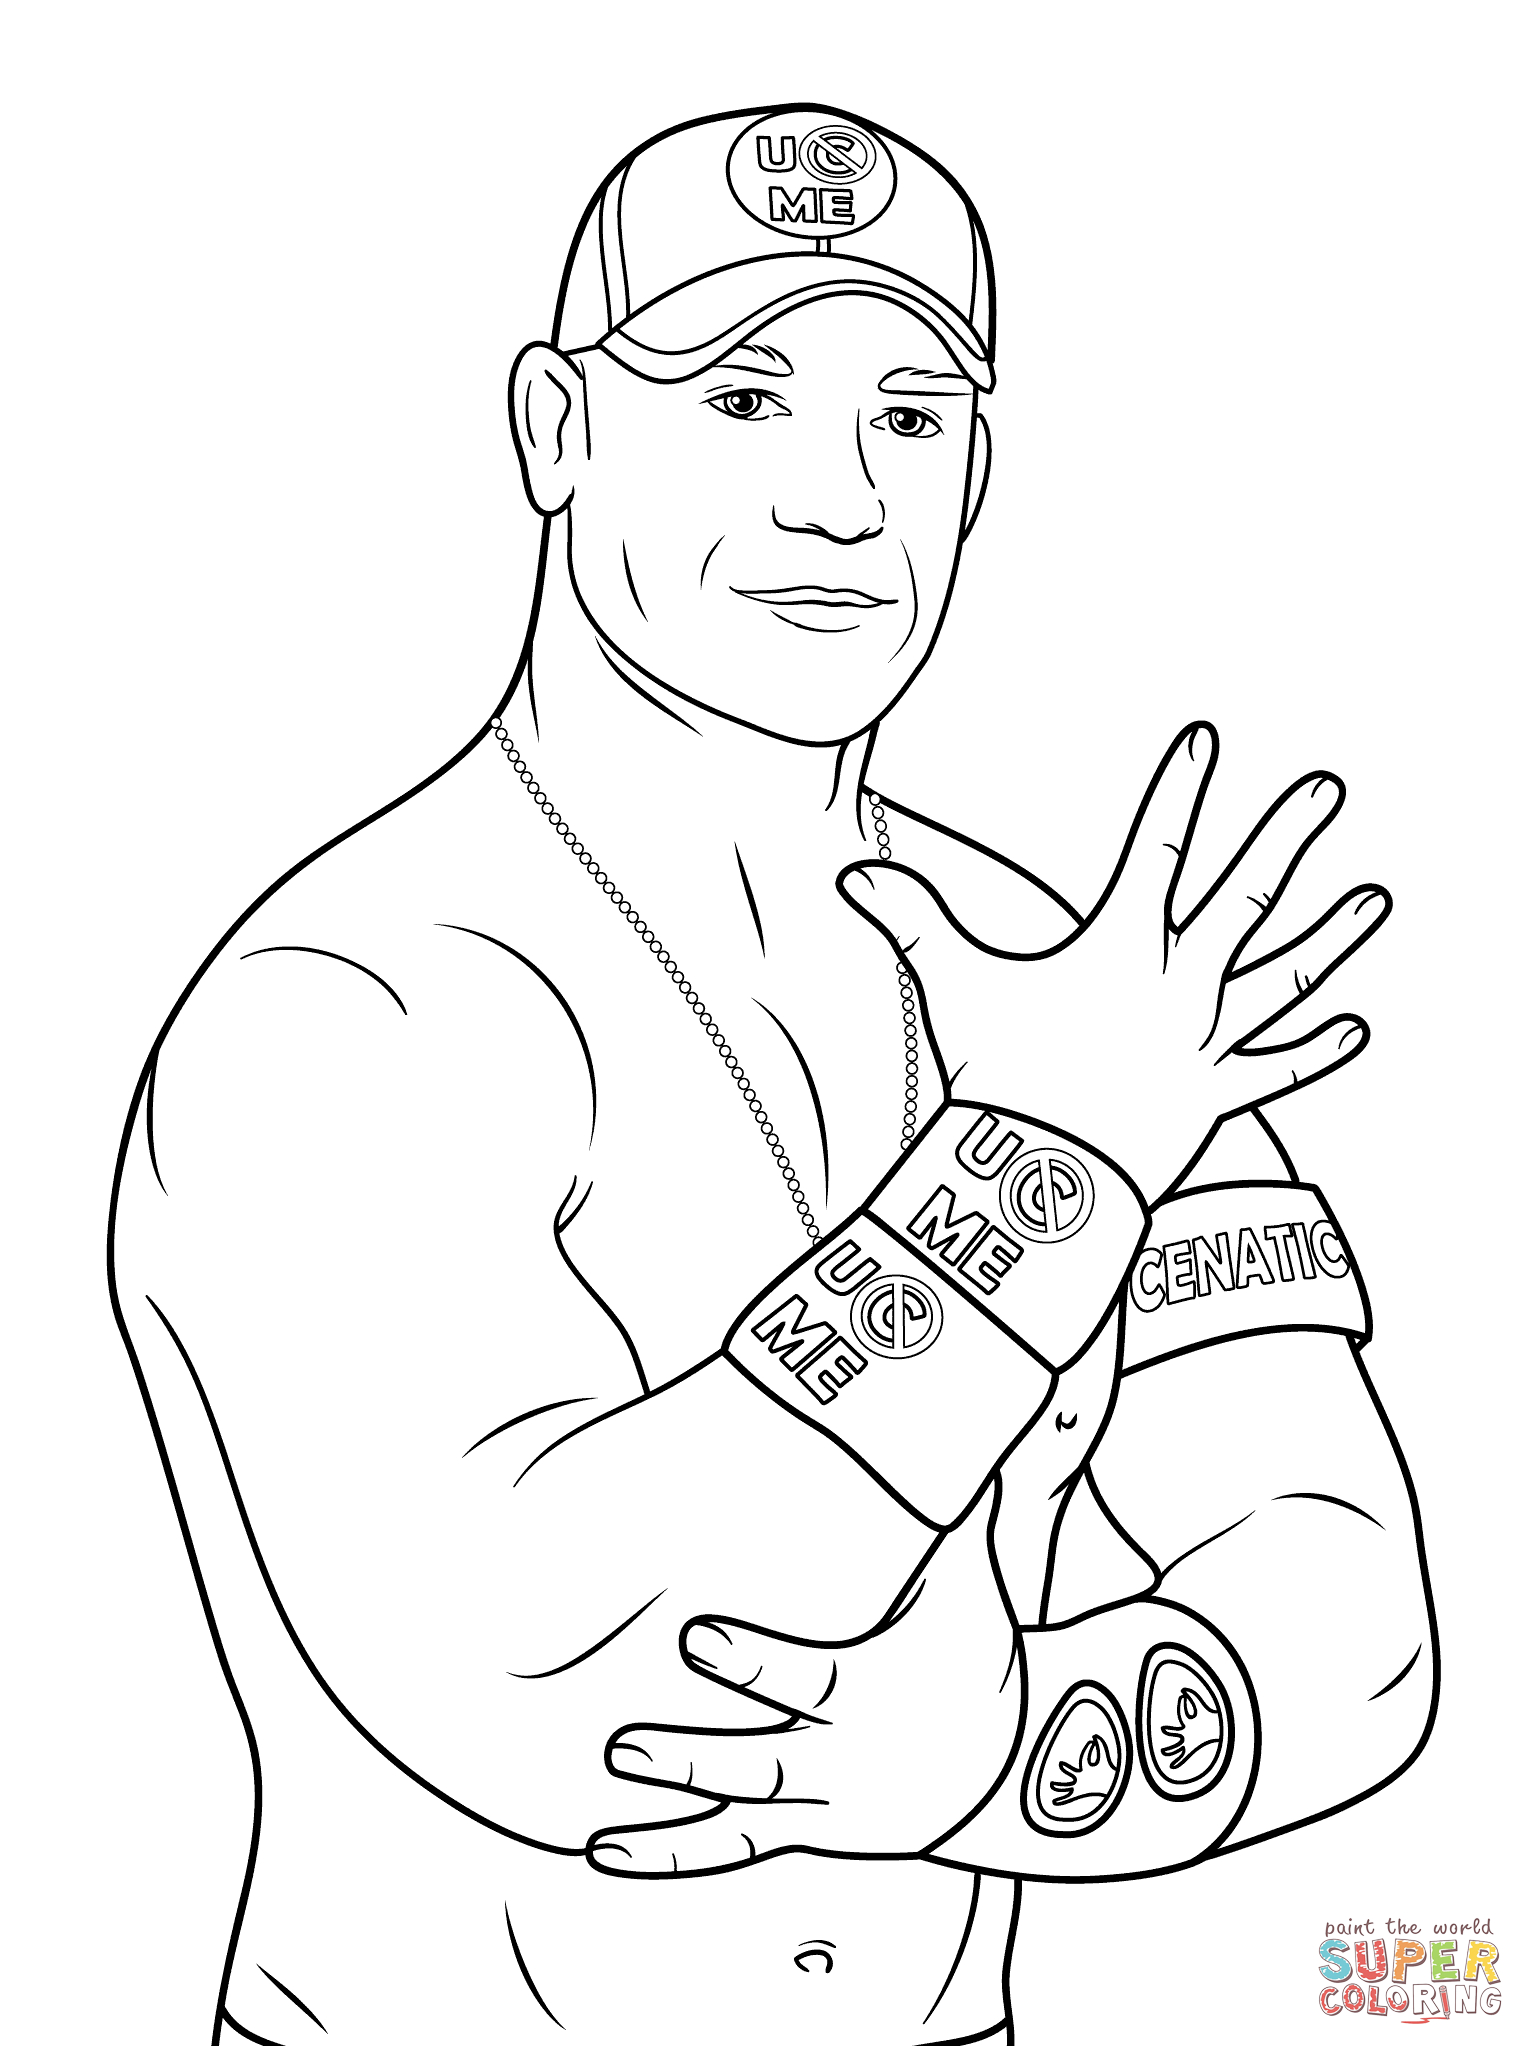 Wwe Wrestling Coloring Pages Wwe Coloring Pages Free Coloring Pages